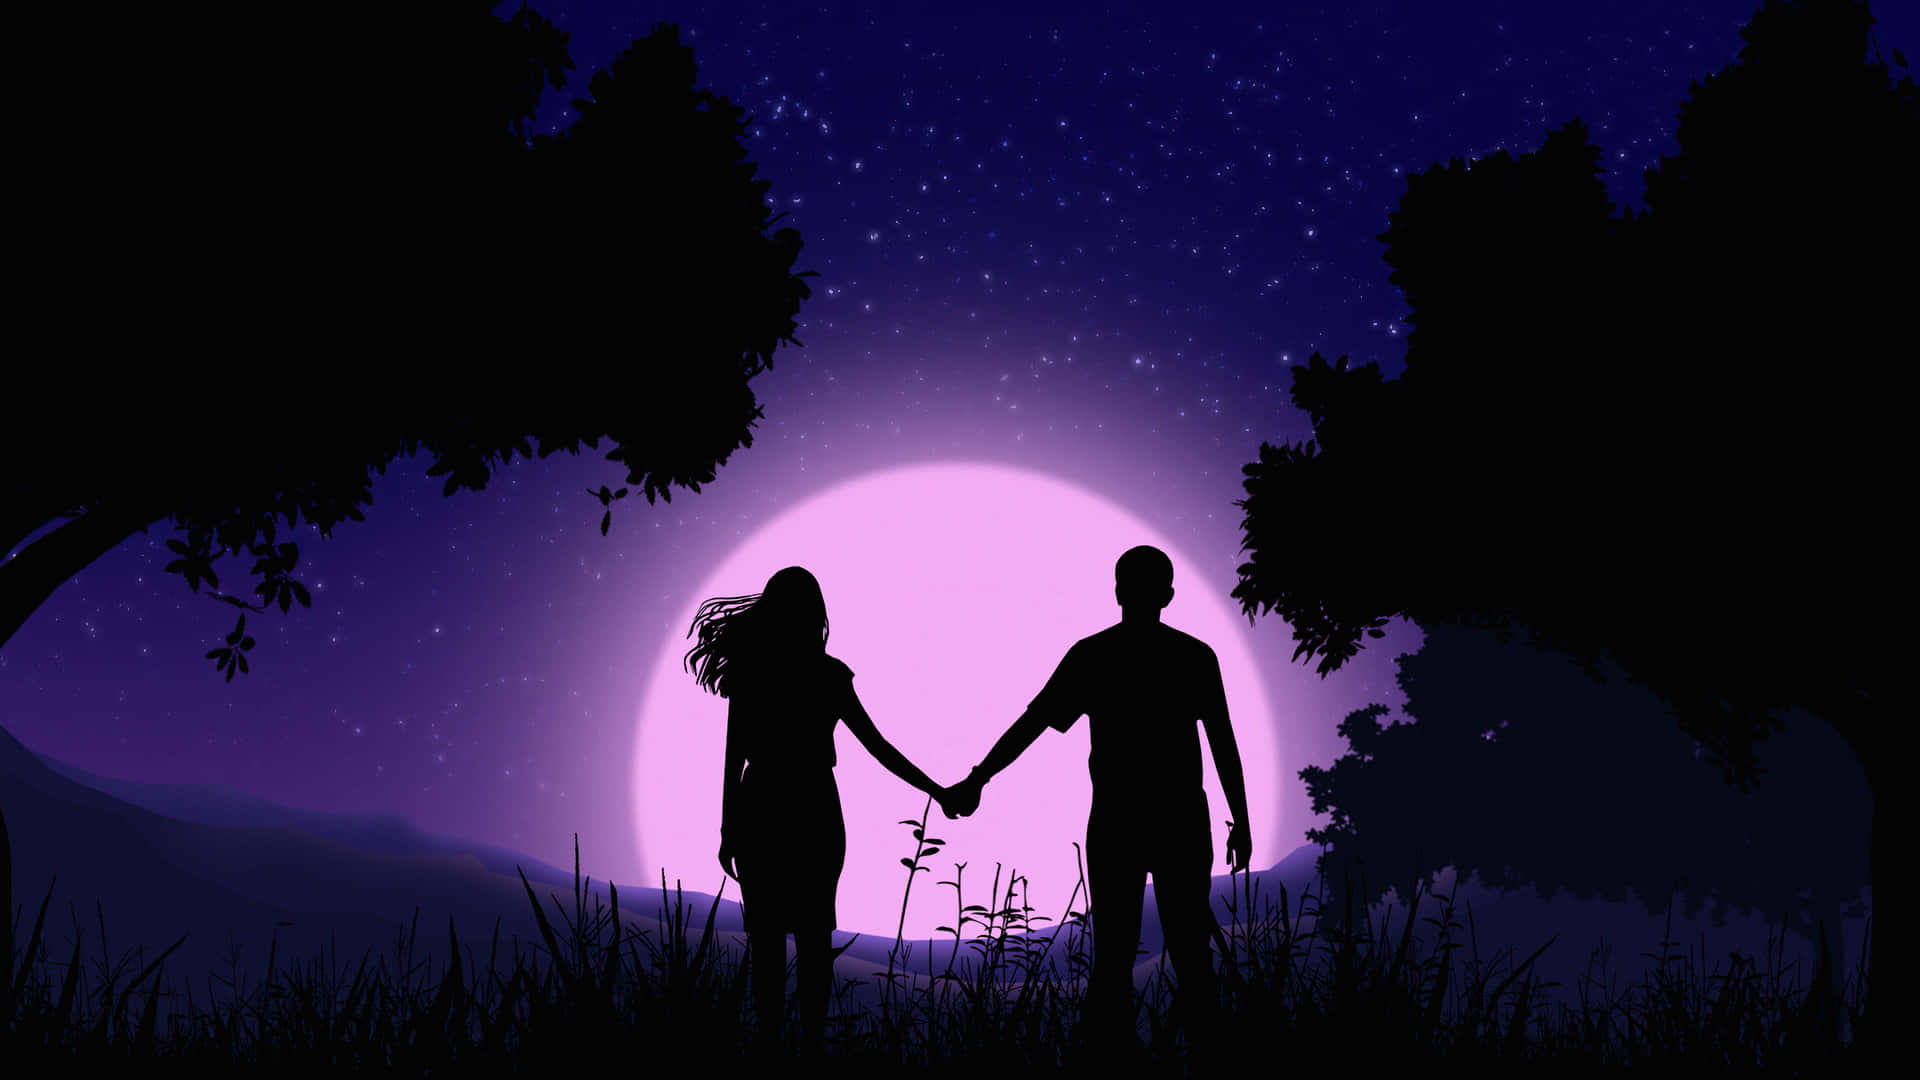 Download A couple holding hands - Together in love | Wallpapers.com